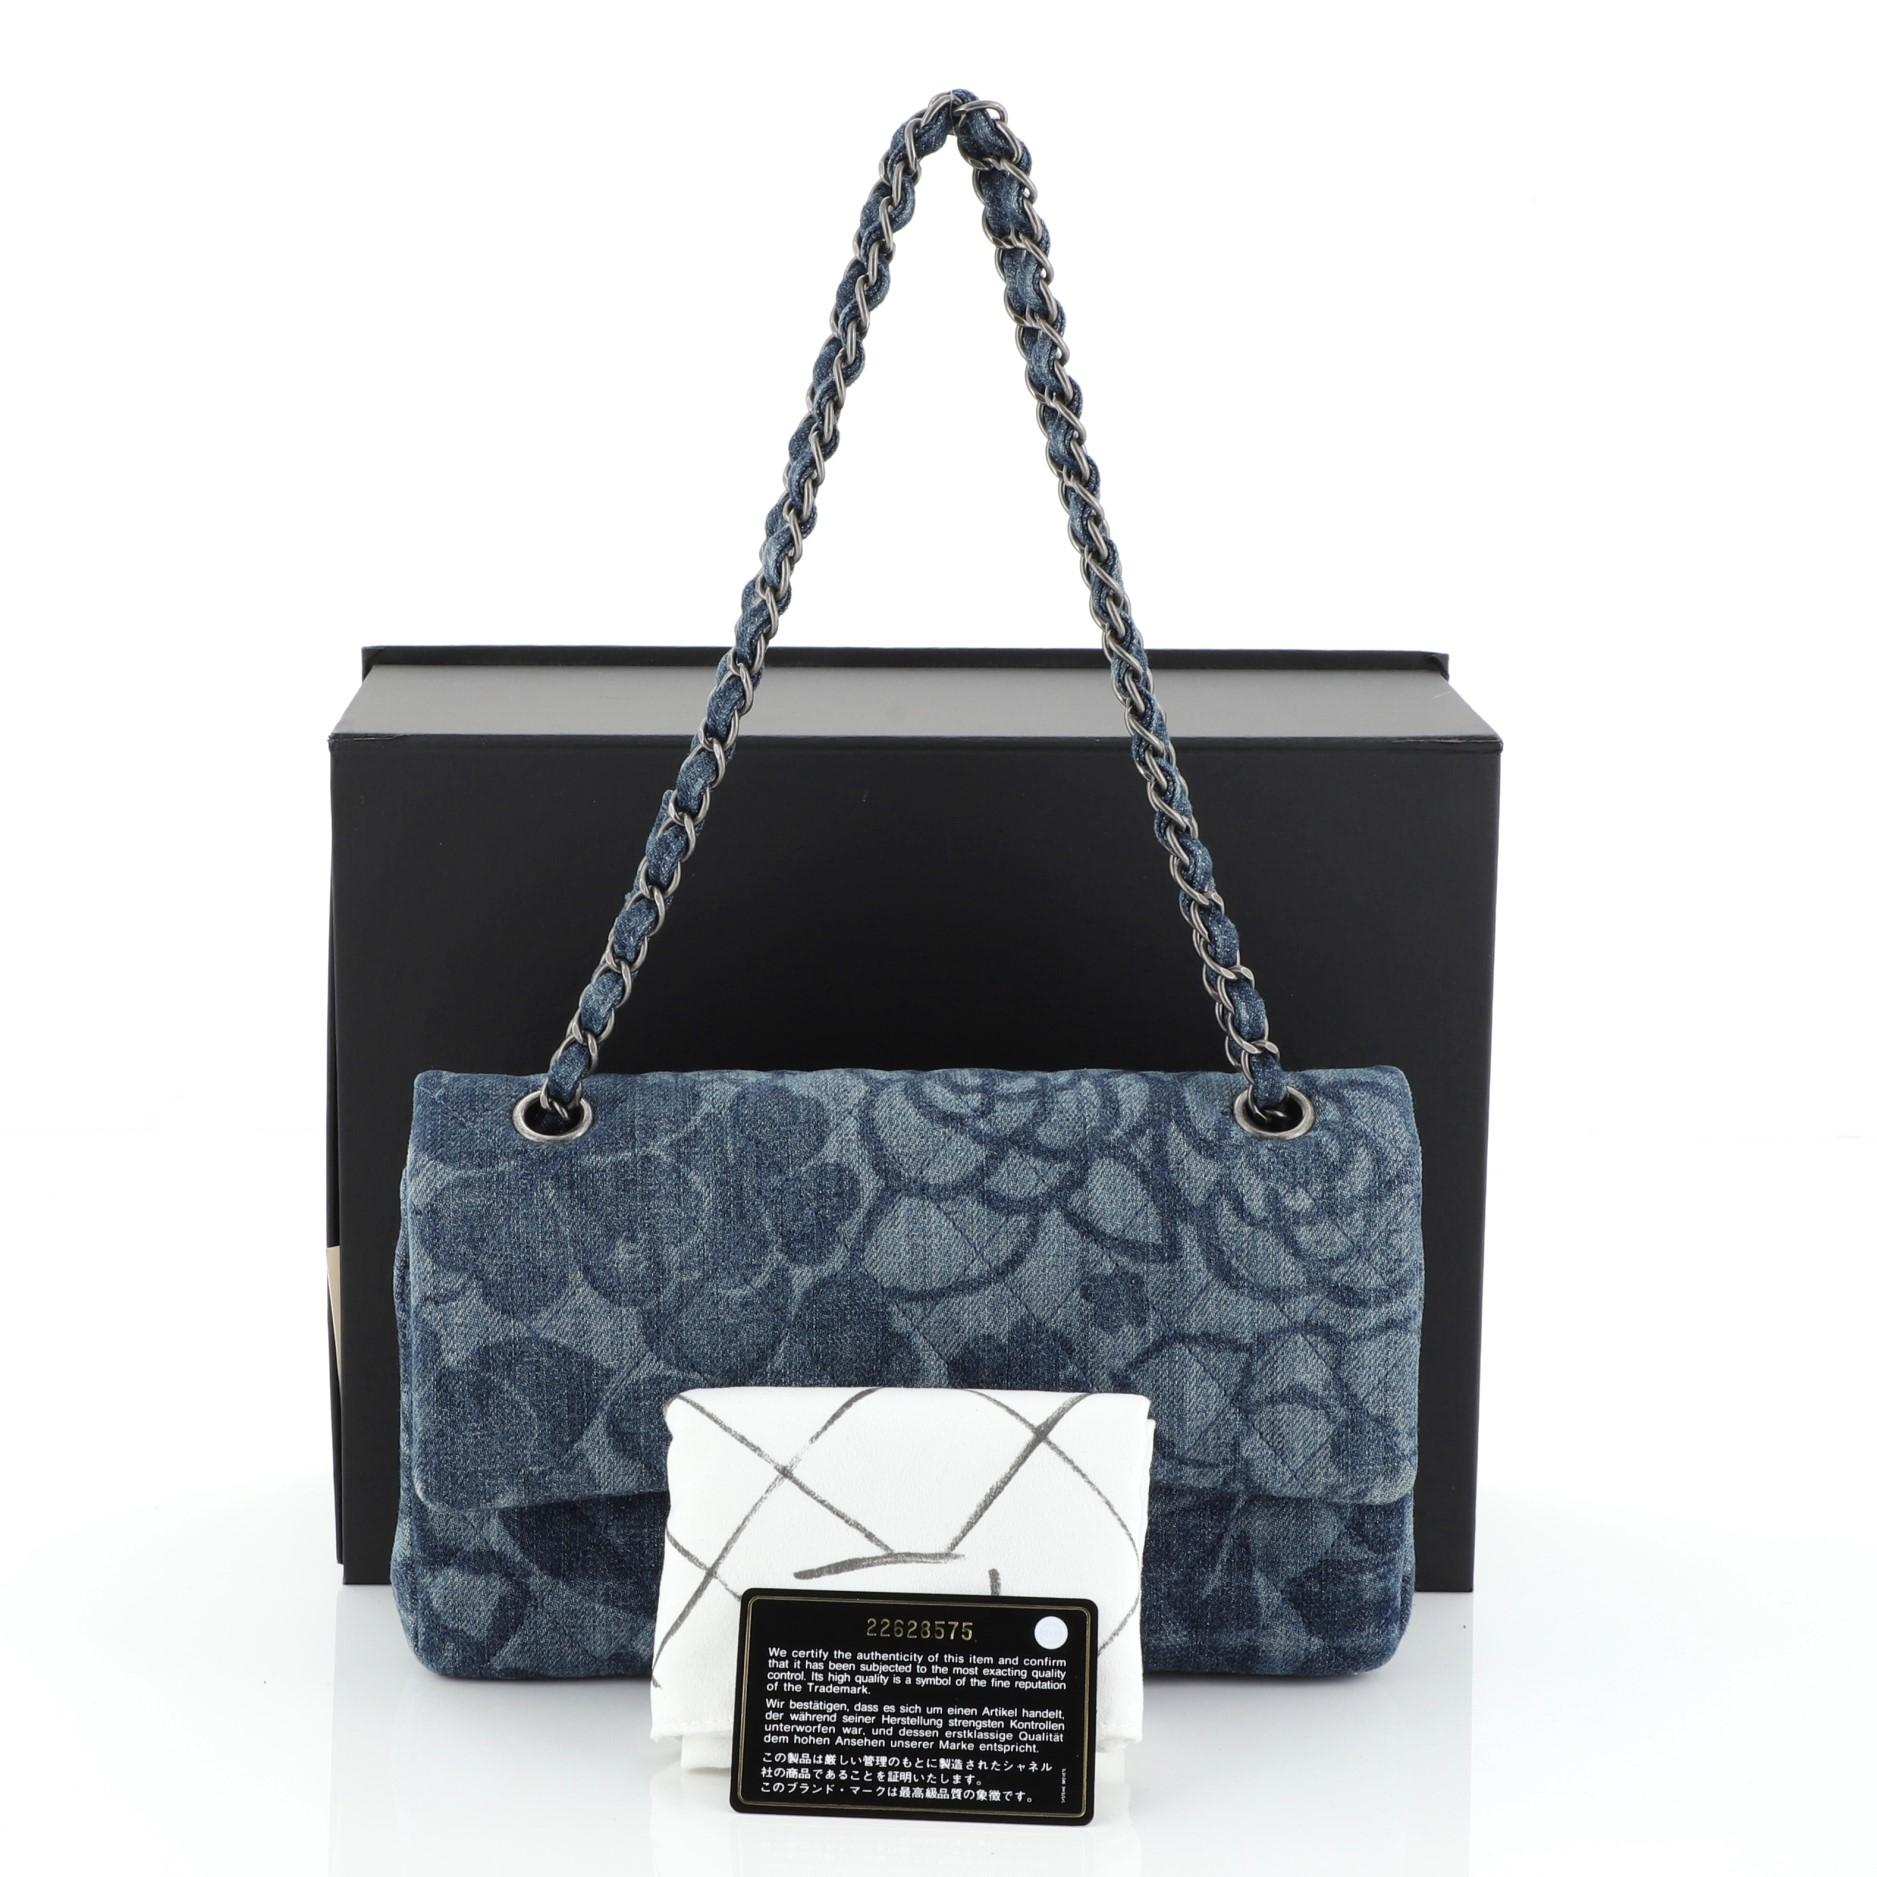 This Chanel Camellia Classic Double Flap Bag Quilted Printed Denim Medium, crafted from blue quilted printed denim, features woven-in denim chain strap, exterior back pocket and aged silver-tone hardware. Its double flap and frontal CC turn-lock